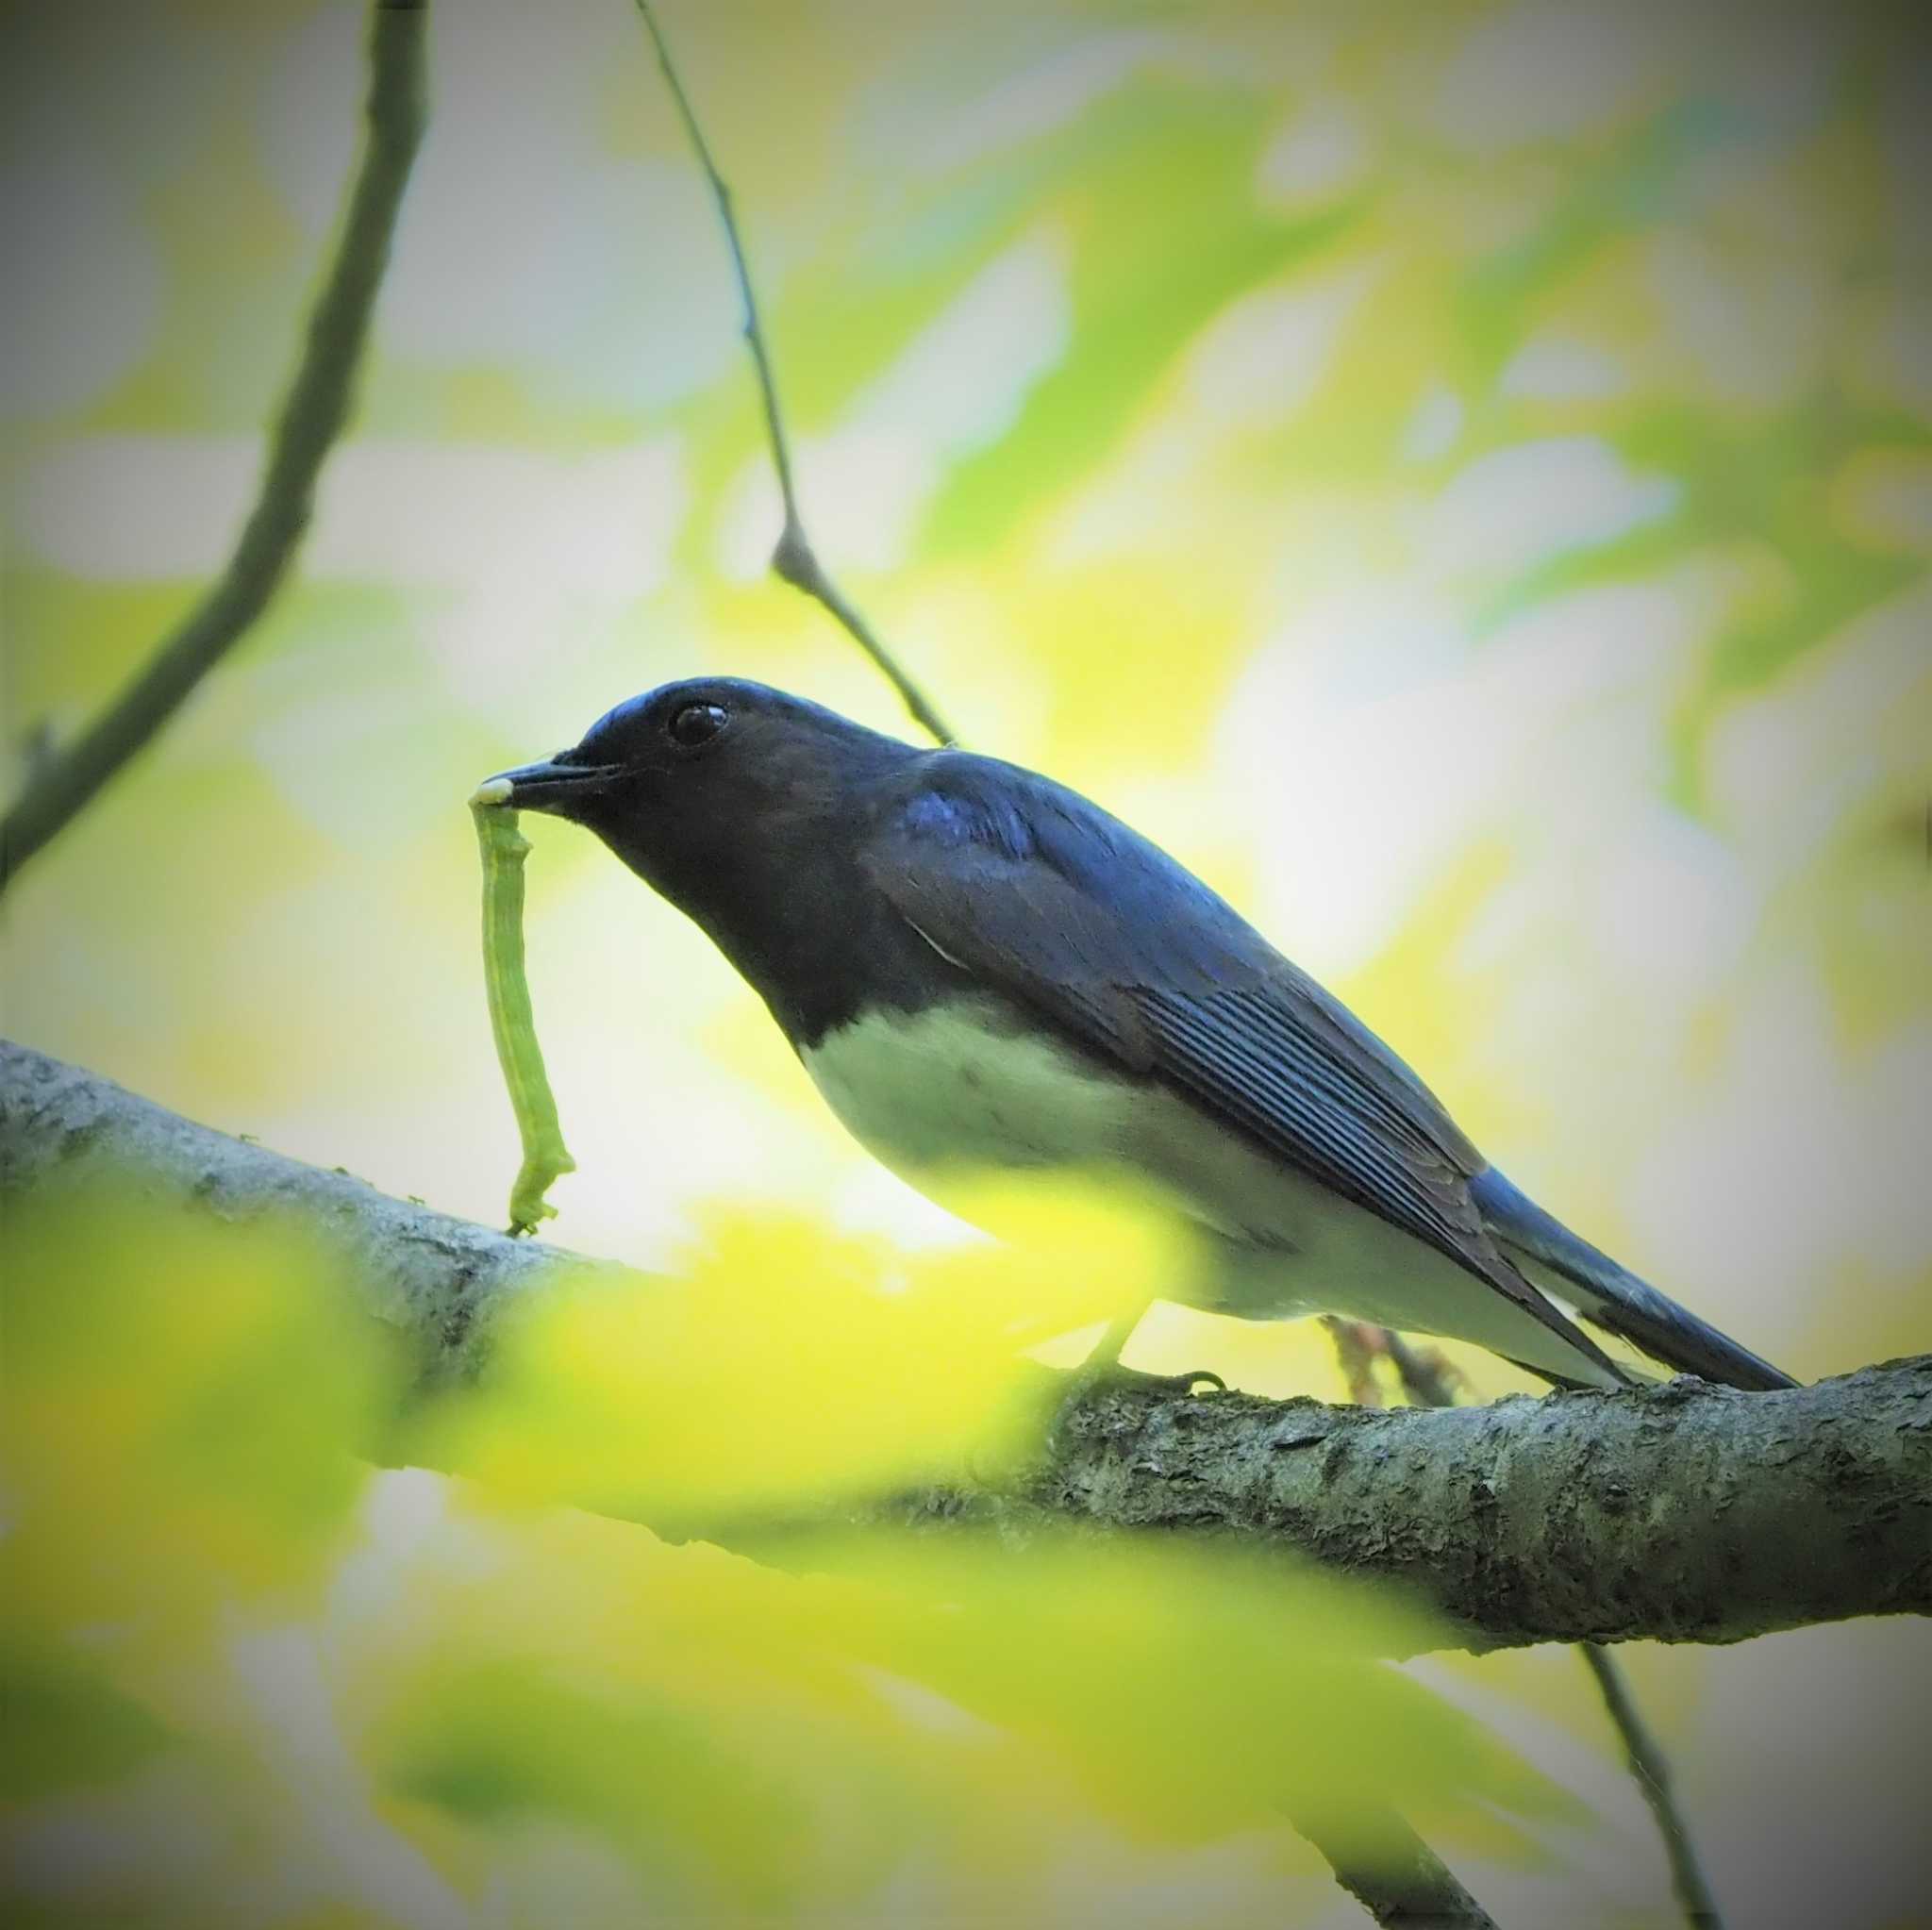 Photo of Blue-and-white Flycatcher at 姫路市自然観察の森 by しんちゃん